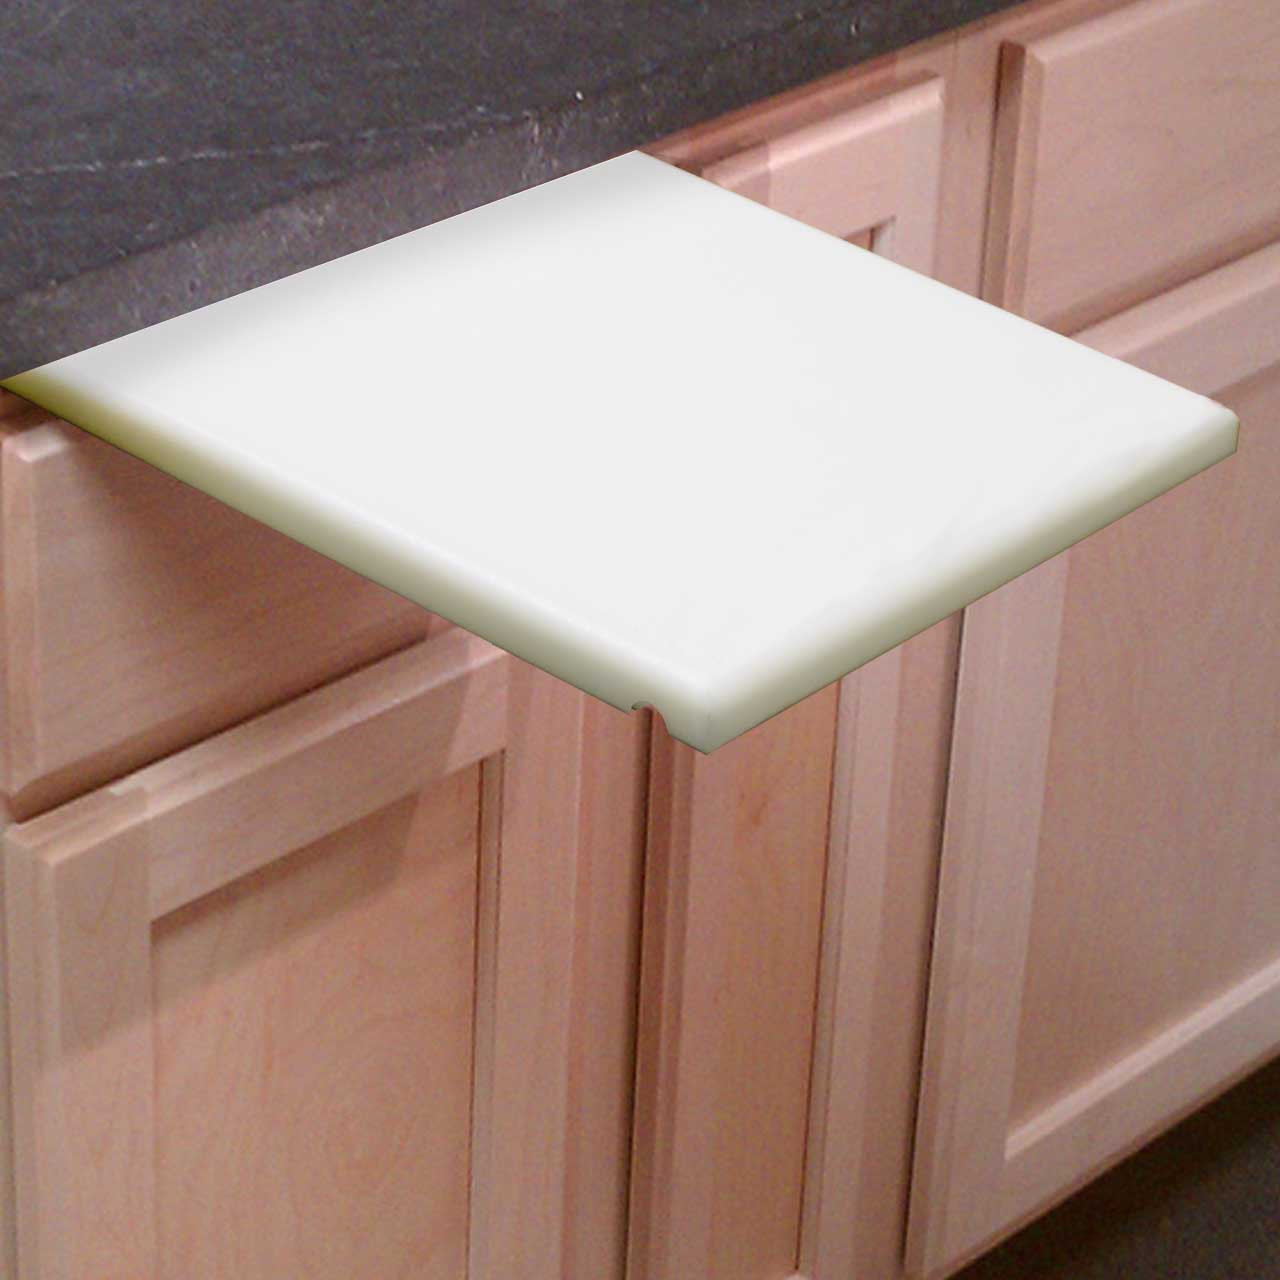 RV Cutting Board Cleaning Tip